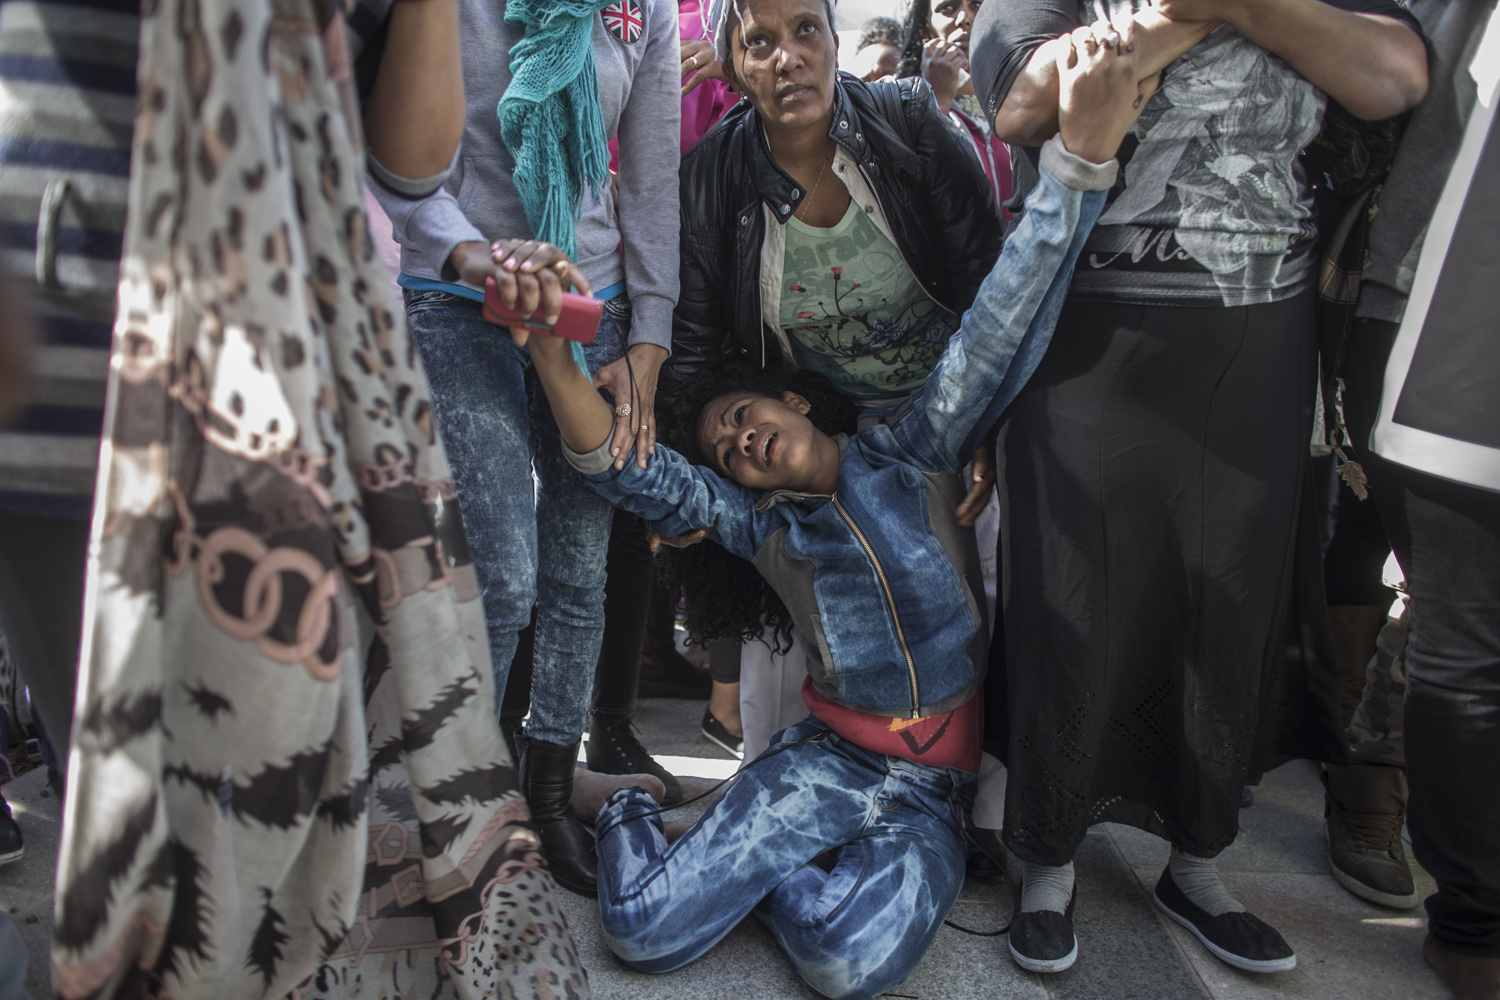 Feb. 11, 2014. A female African asylum seeker breaks down in tear during a protest outside the Ministry of Interior in Tel Aviv, Israel.